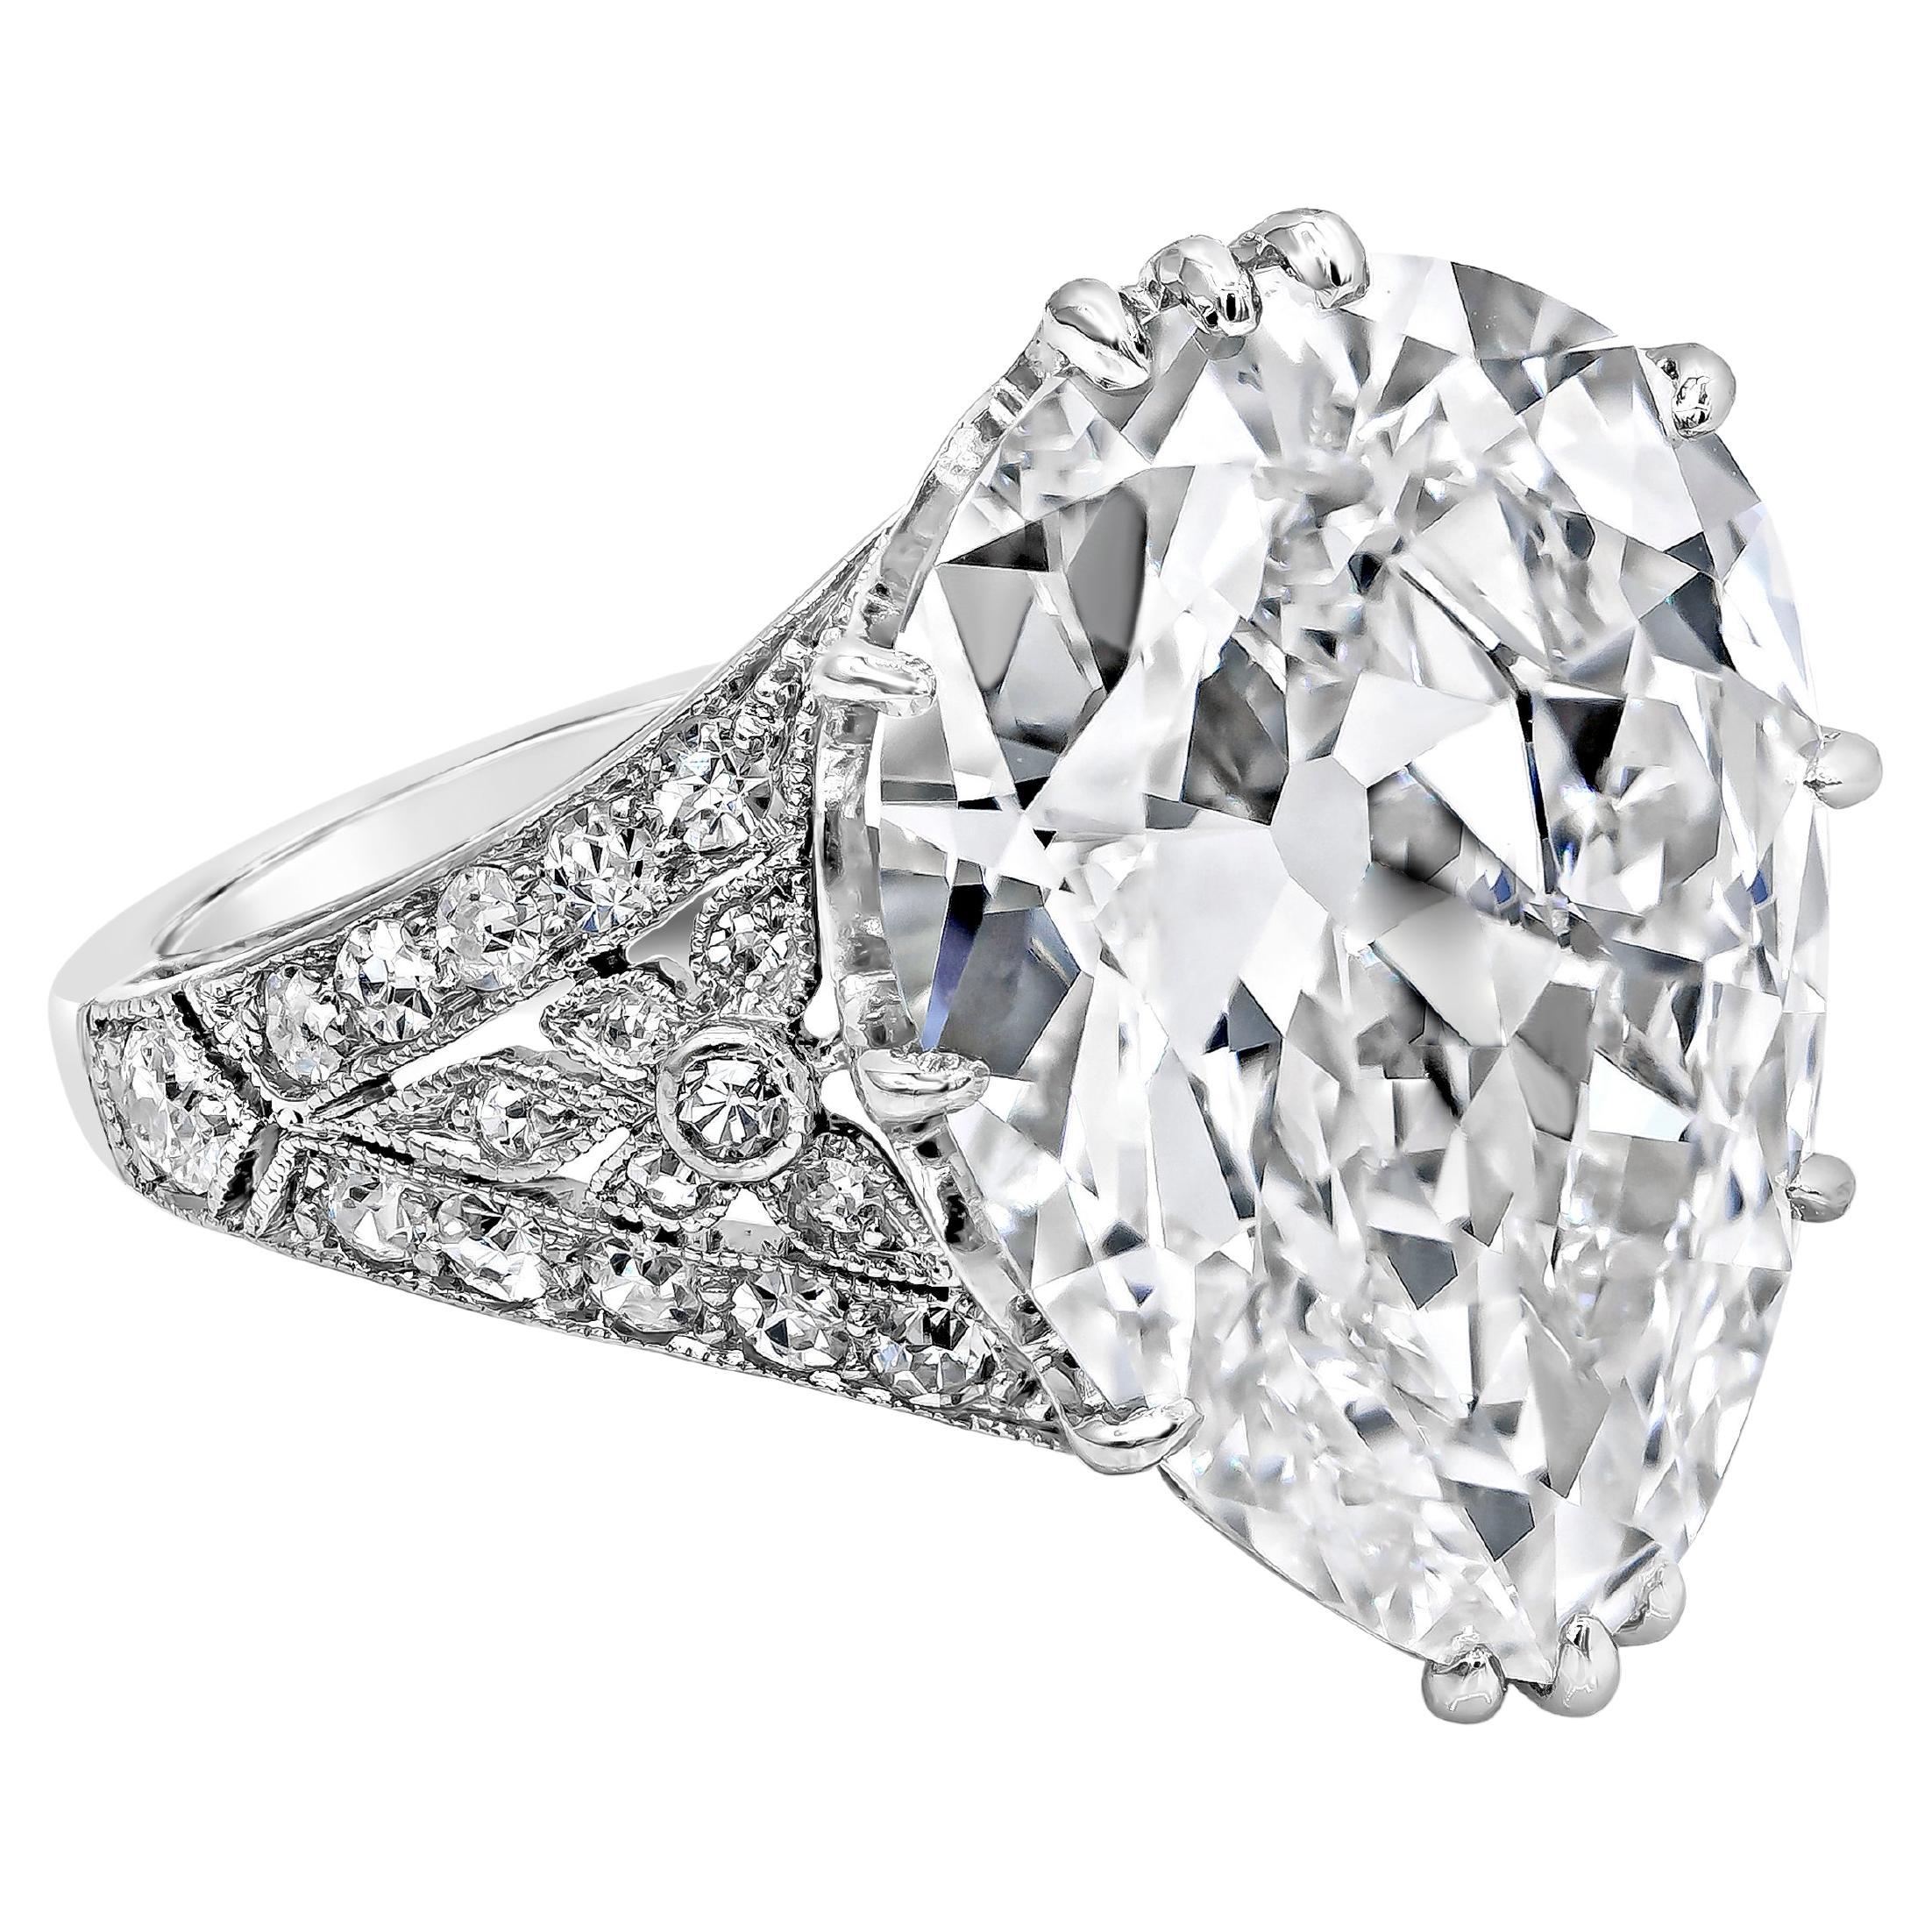 A gorgeous and unique ring showcasing a GIA Certified 7.03 carat pear shape diamond, G Color and VVS1 in Clarity. Set in an antique setting accented with 34 single cut diamonds weighing 0.37 carats total. Made with Platinum. Size 6 US